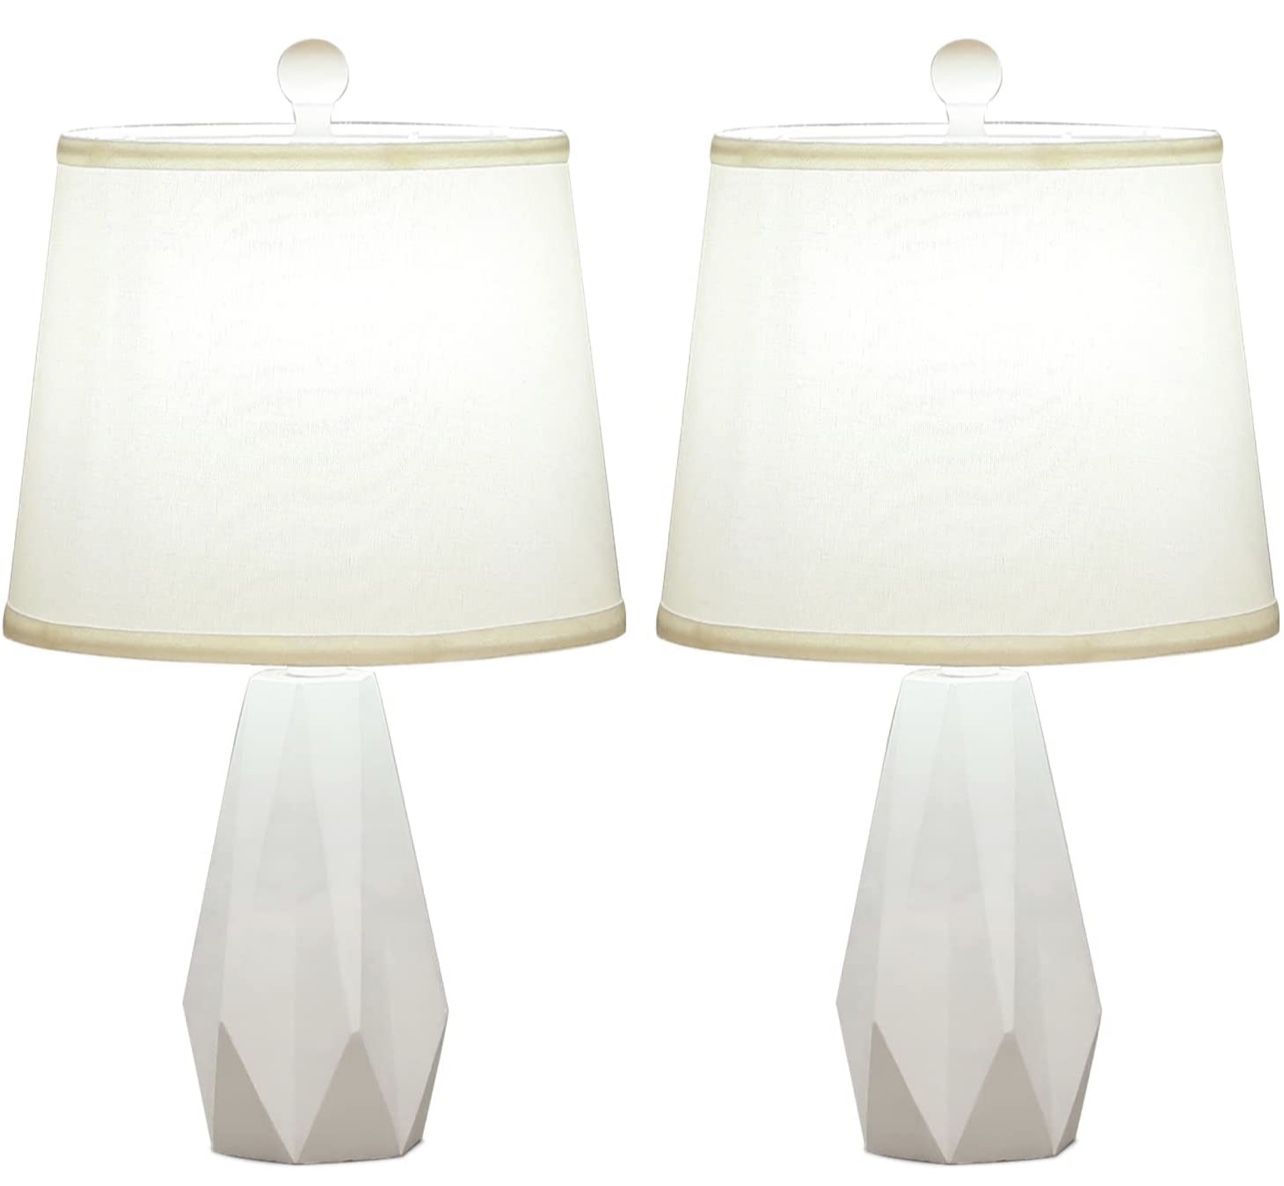 (brand new) Sollertia Table Lamps for Living Room Set of Two, Imitation Diamond End Table Lamp, White Fabric Shade, Bedroom Living Room Home Office De